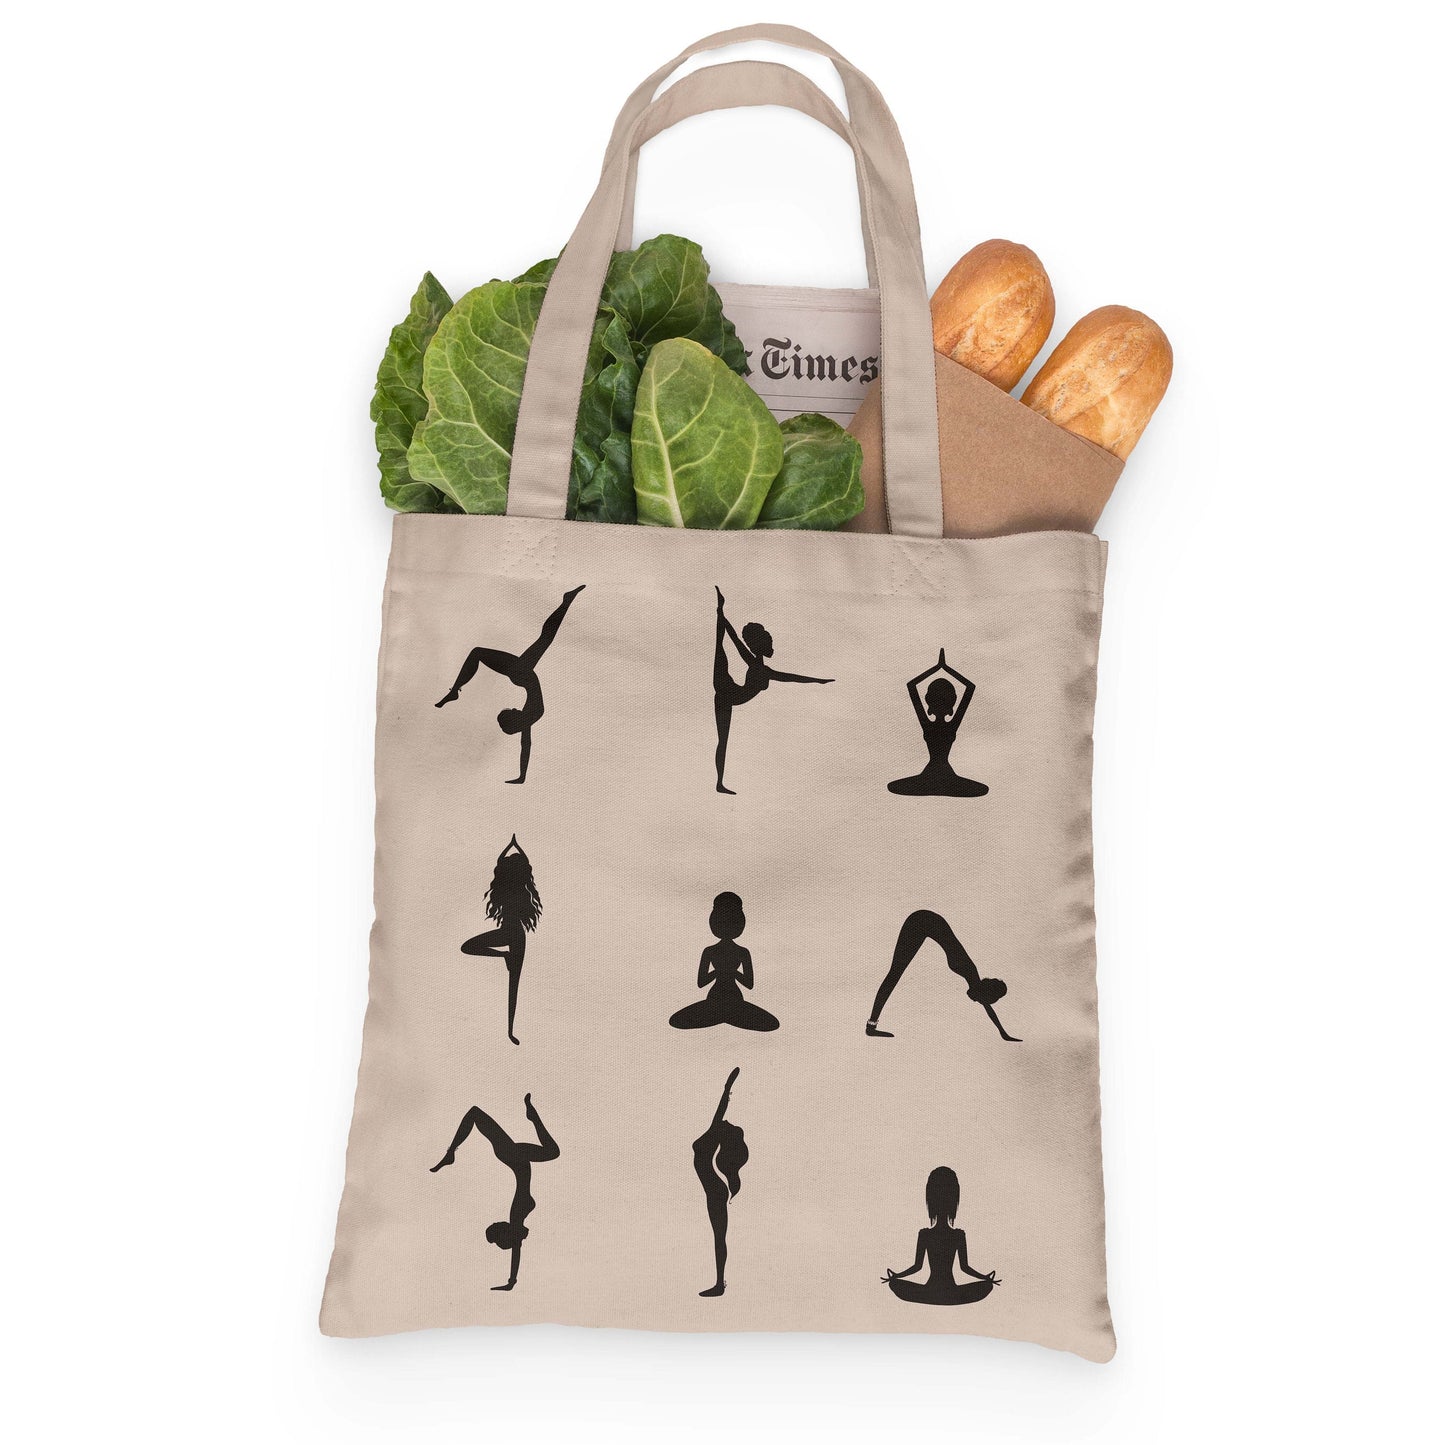 Yoga Pose Silhouettes Tote 100% Cotton Grocery Tote, Book Tote, Office Tote. Premium Cotton Canvas 15.5" by 19.5 " with 5" Gusset on bottom